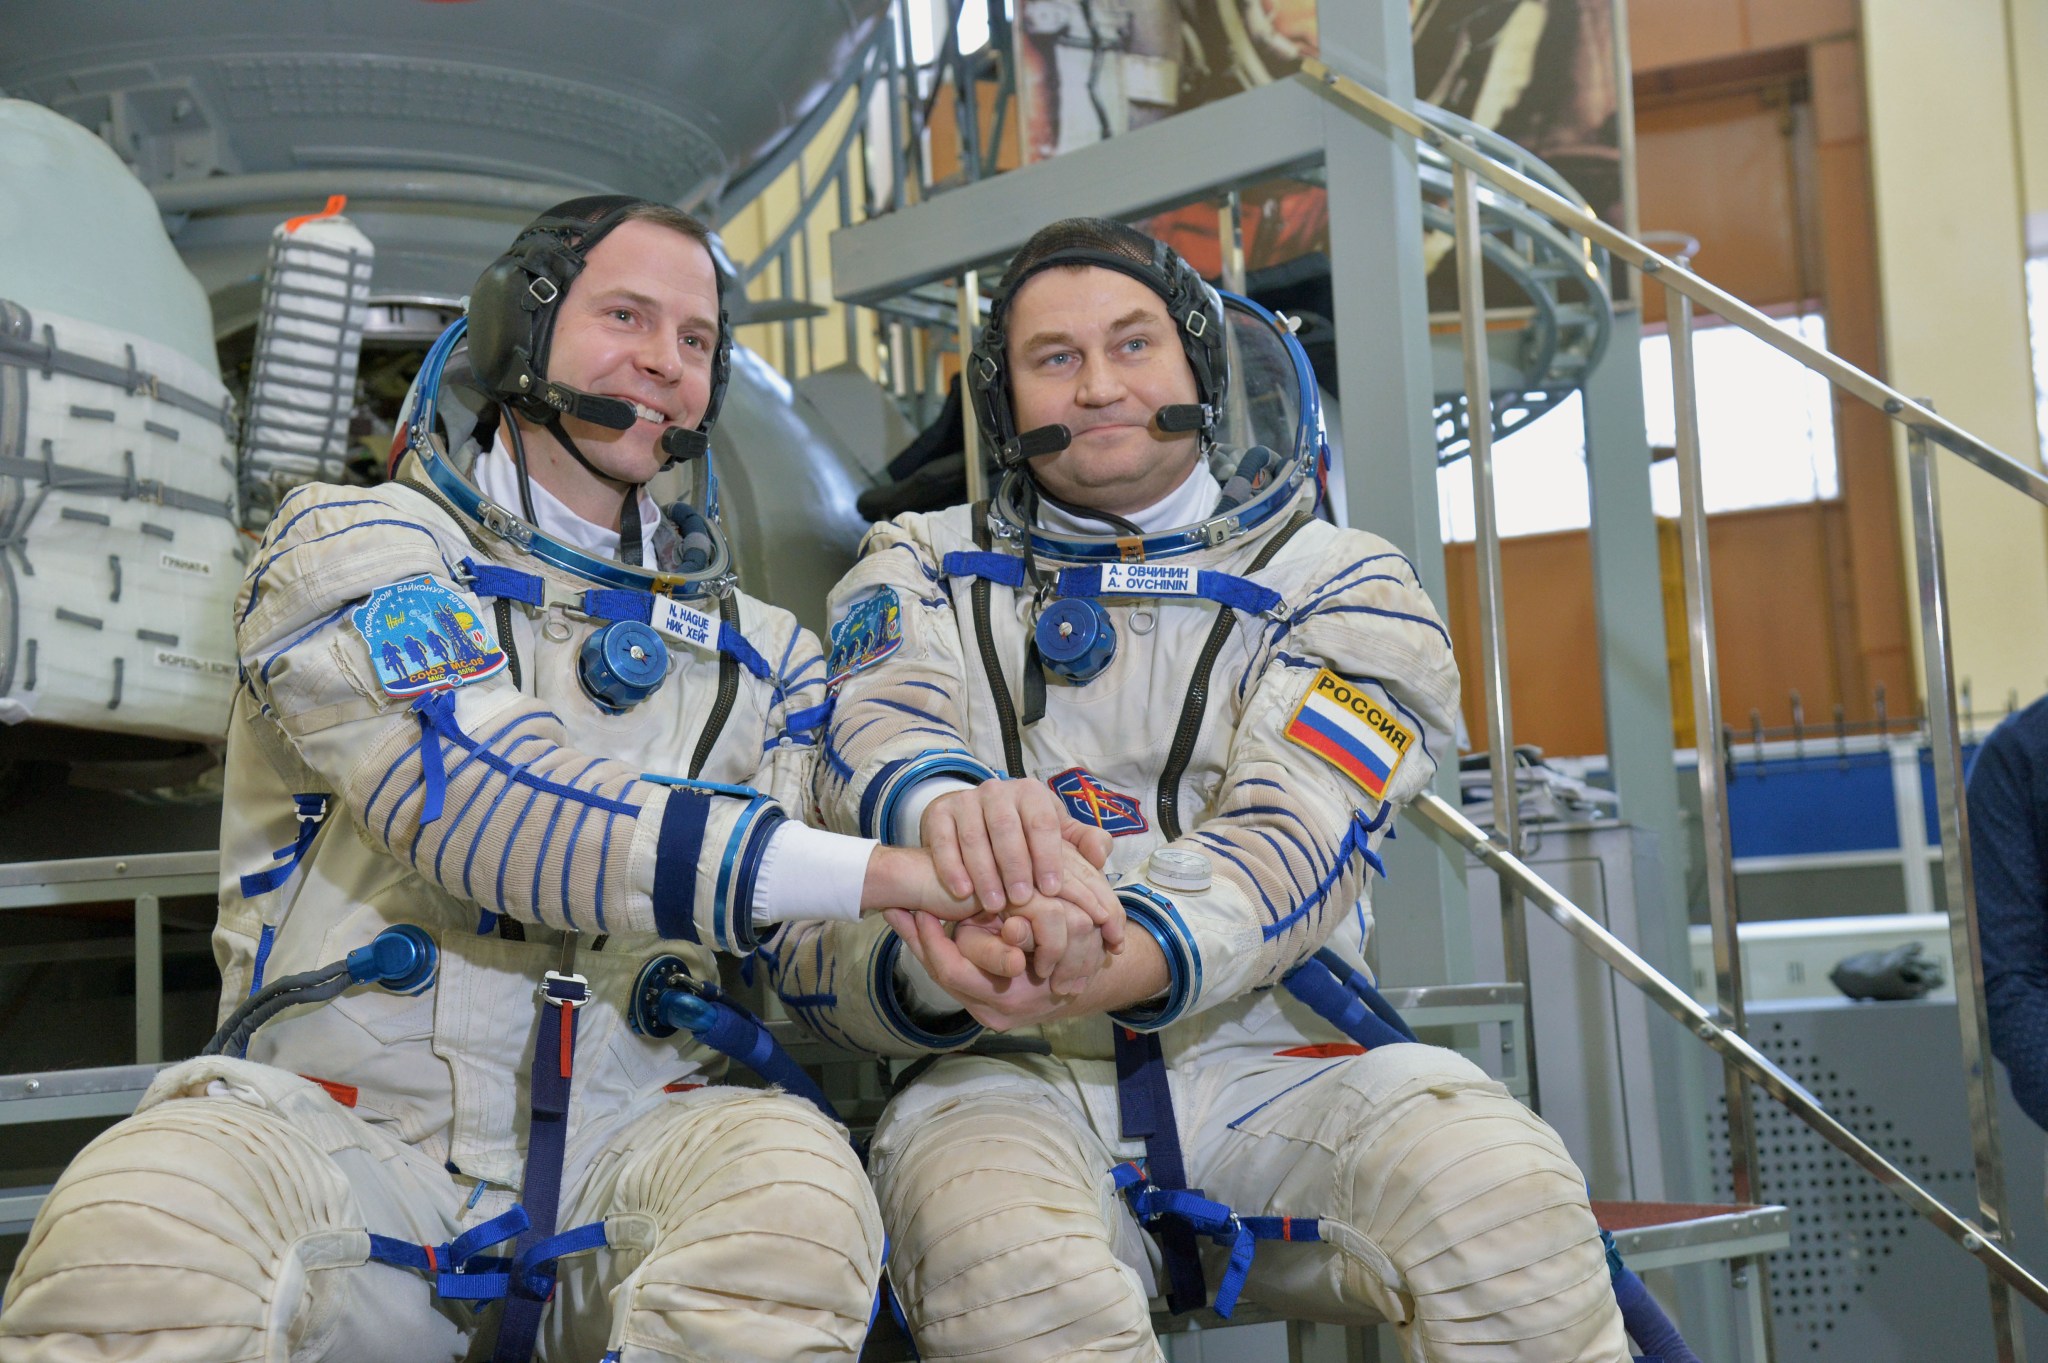 Expedition 55 backup crew members Nick Hague of NASA (left) and Alexey Ovchinin of Roscosmos (right)